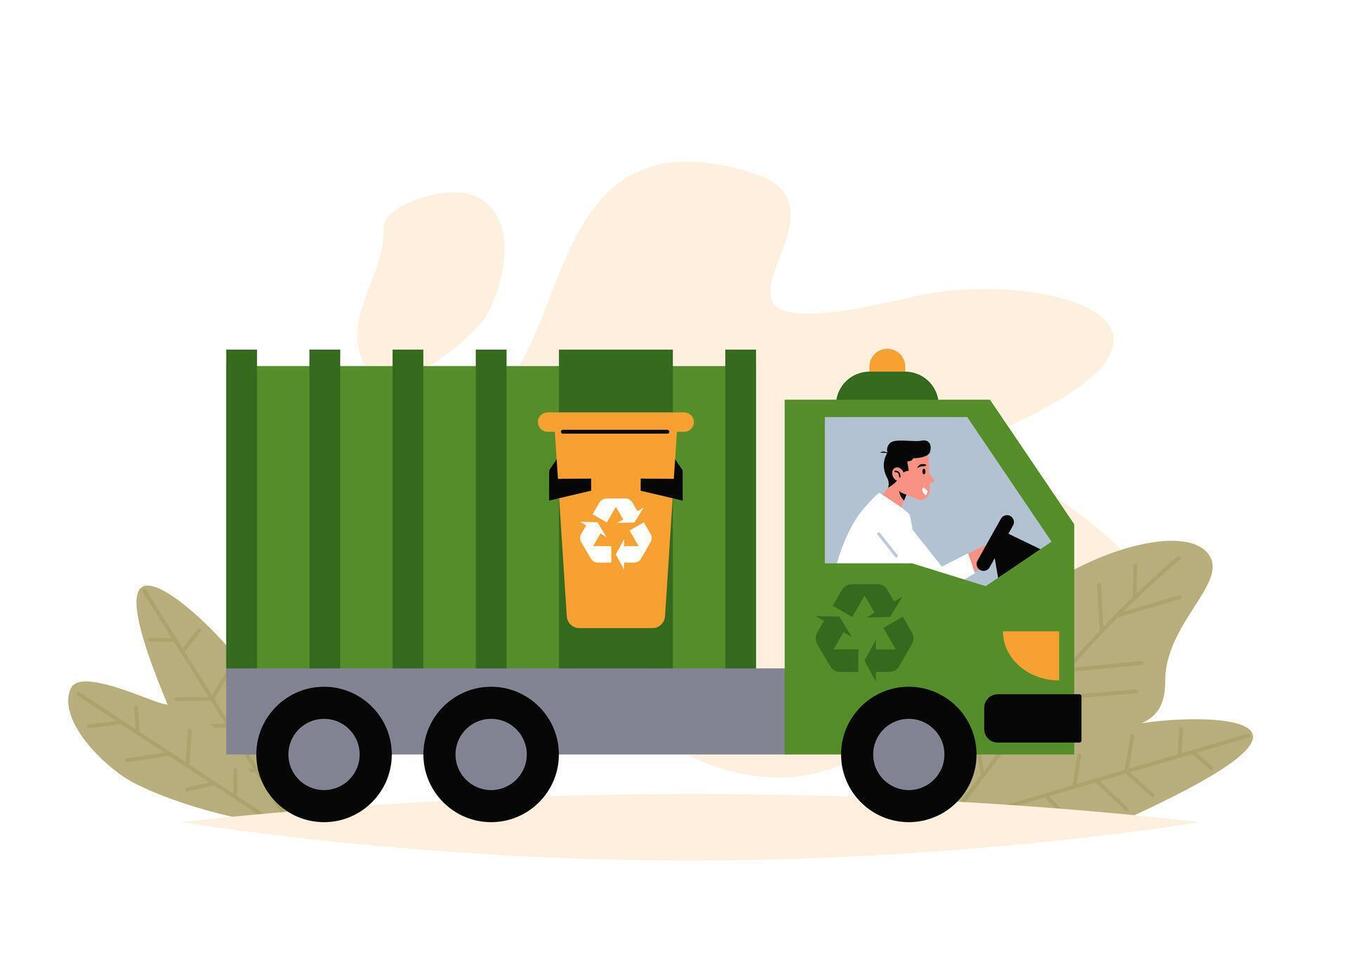 Loader transporting garbage. Help planet, green environment concept vector